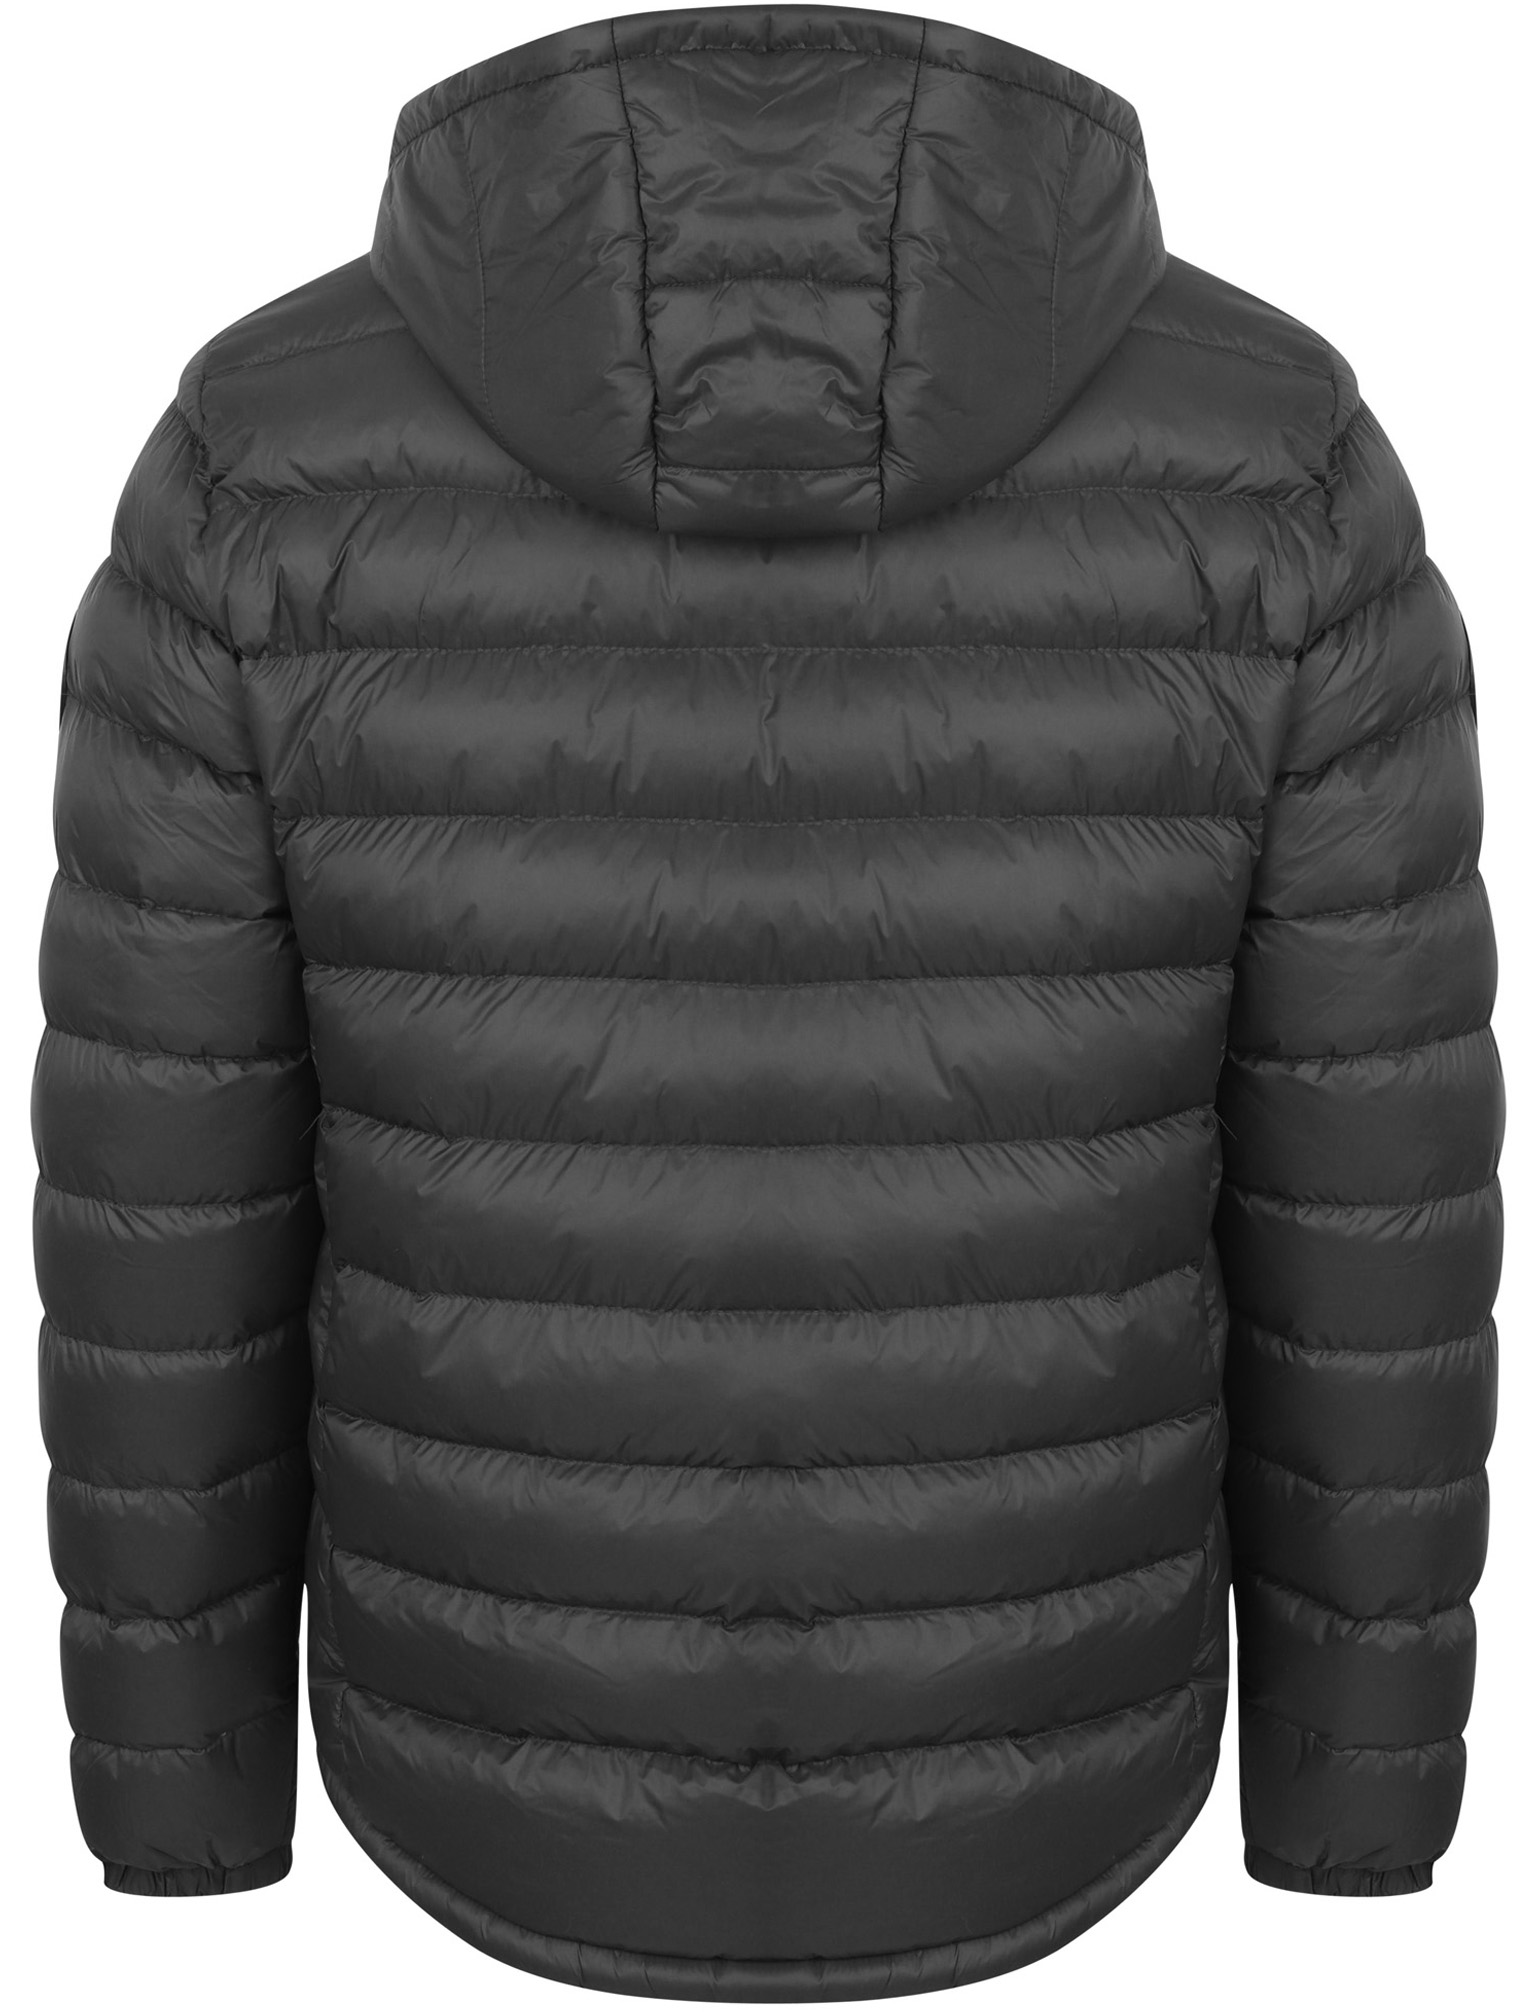 Tokyo Laundry Men's Langham Hooded Quilted Puffer Jacket Size S M L XL ...